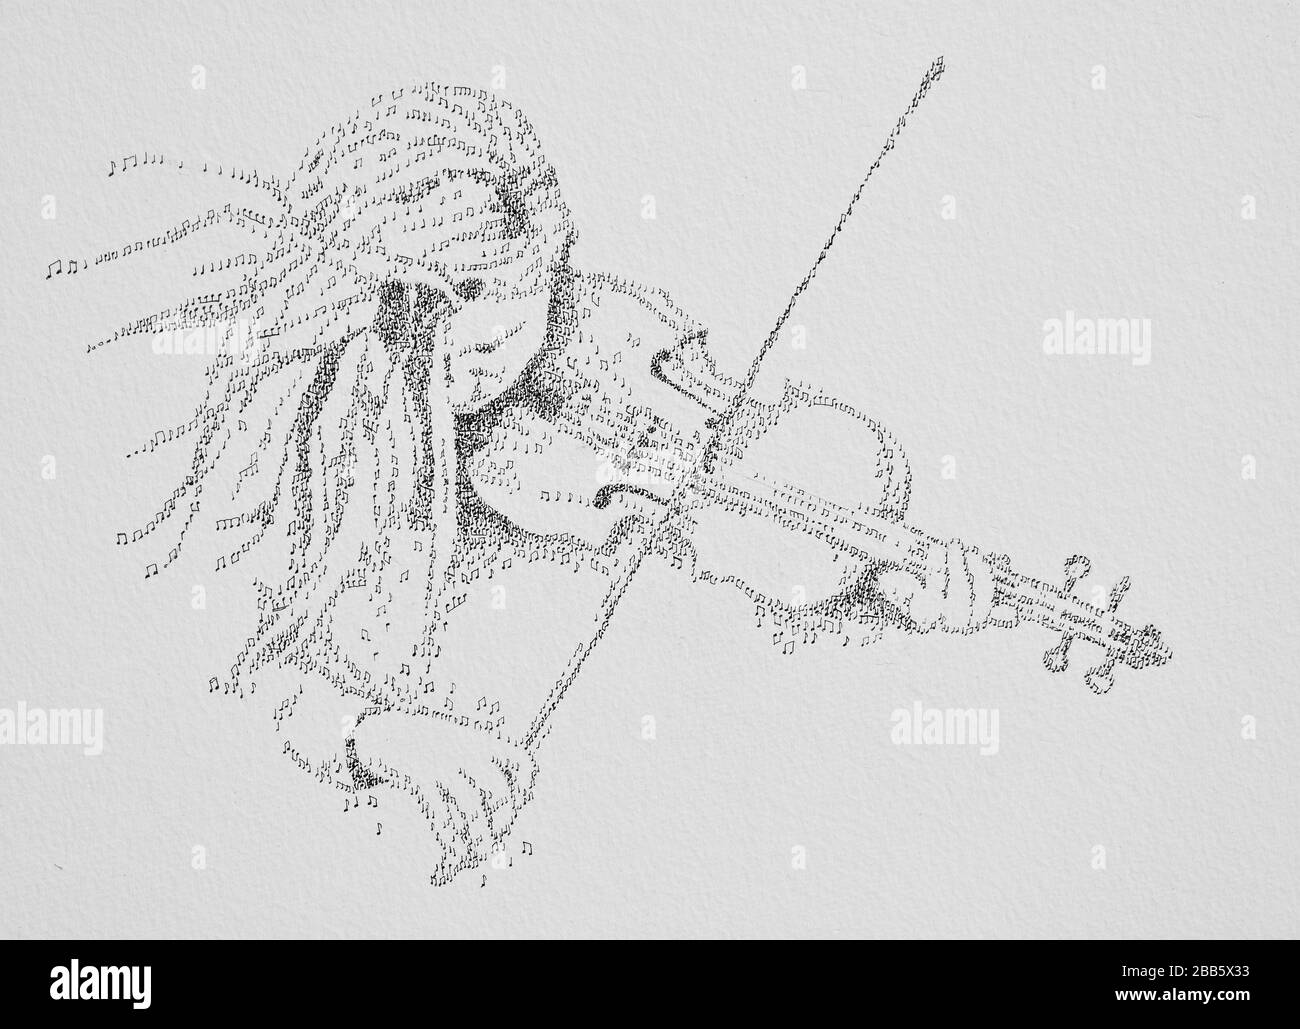 Illustration of Woman playing violin made of tiny musical notes. Stock Photo